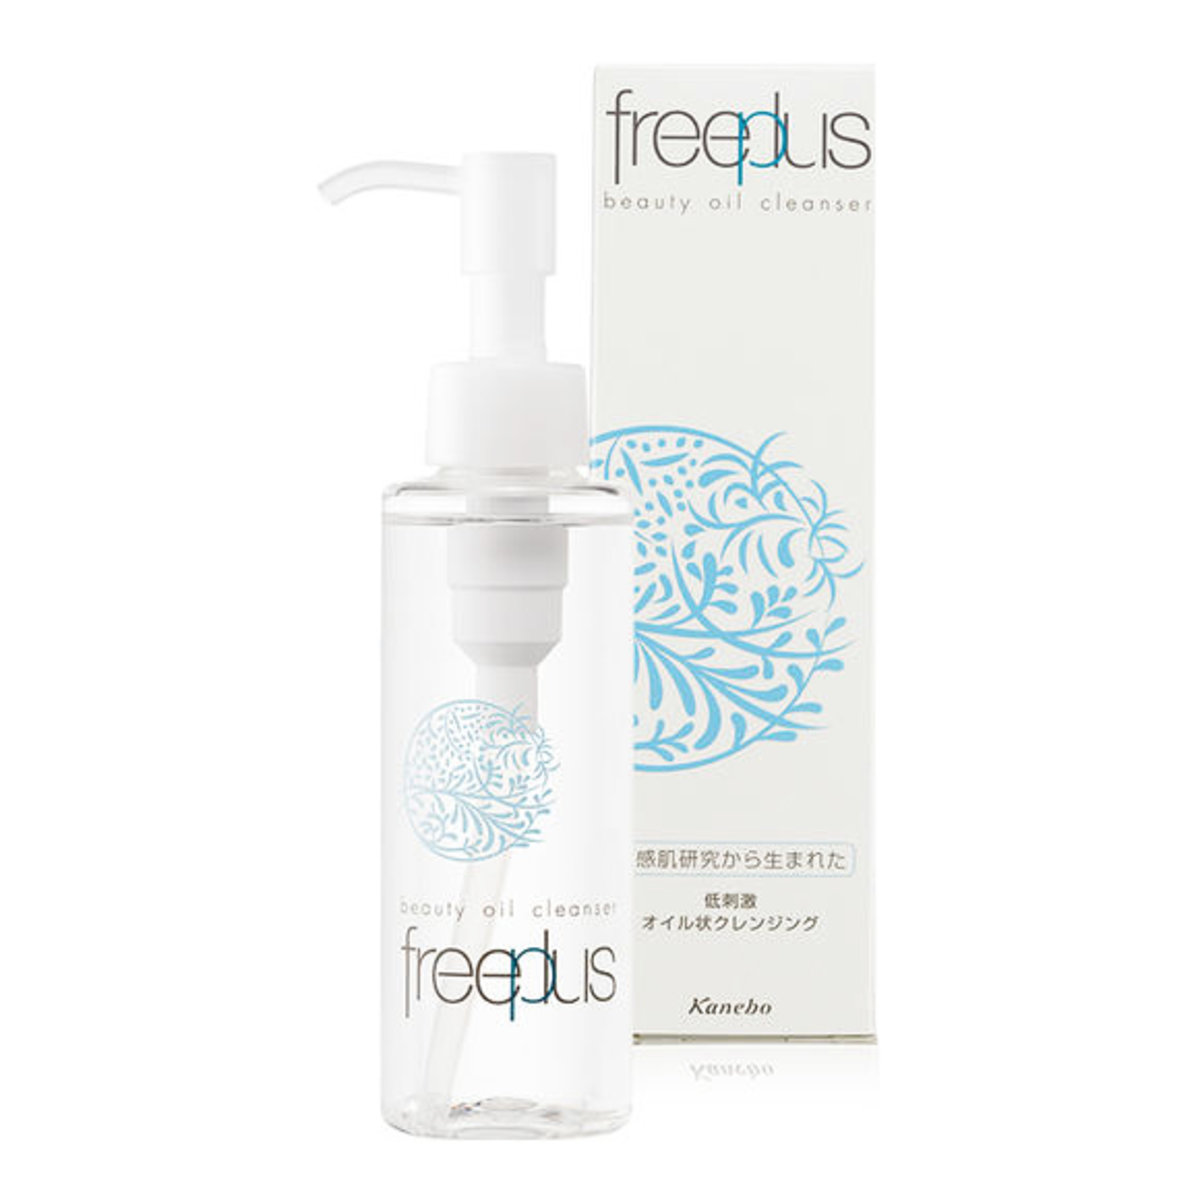 Kanebo Freeplus Beauty Oil Cleanser At Low Price Tofusecret